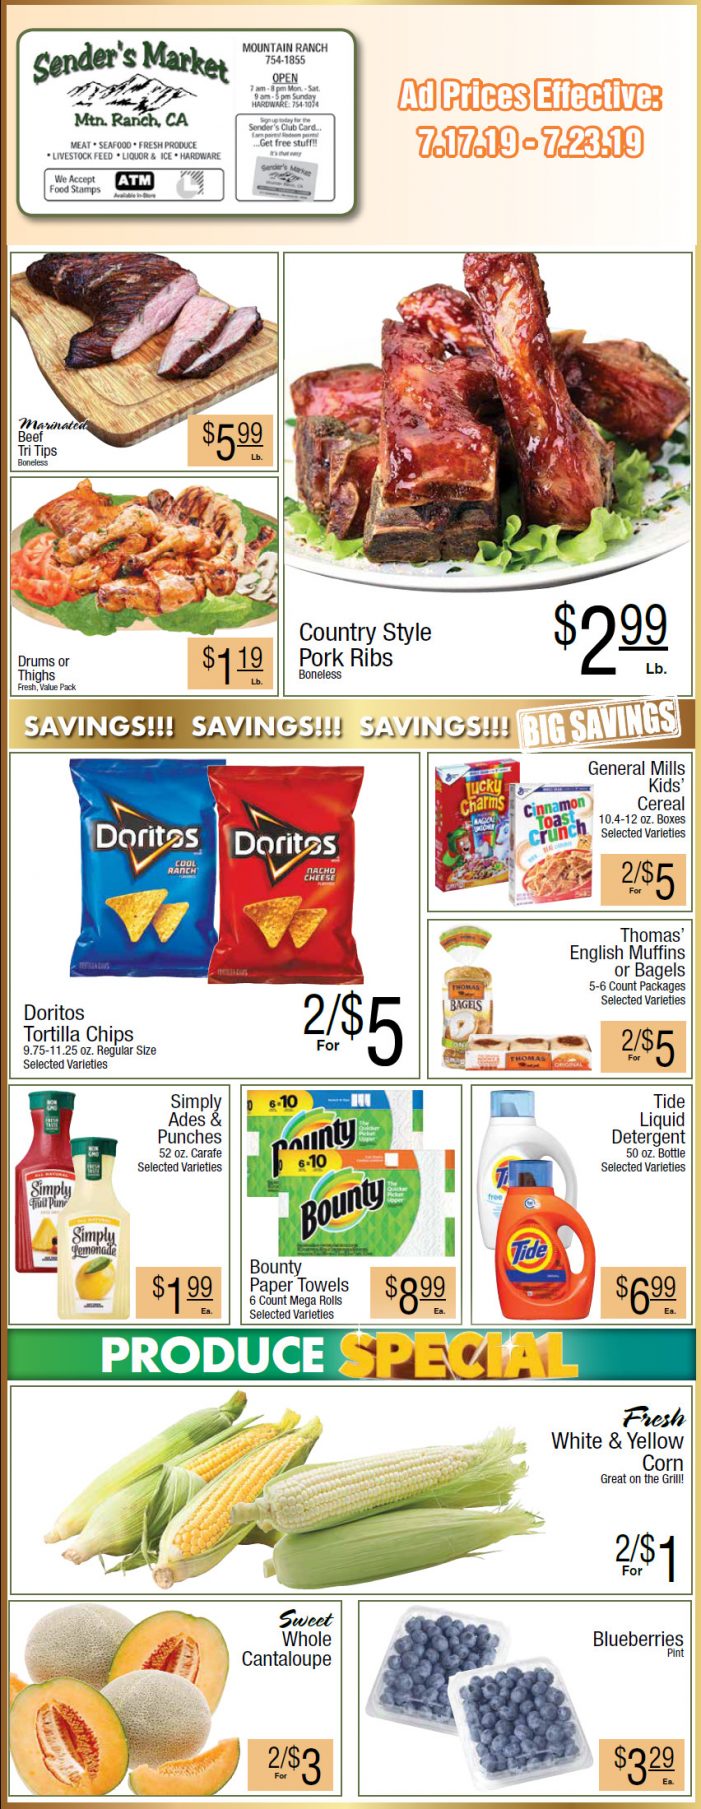 Sender’s Market Weekly Ad & Grocery Specials Through July 23